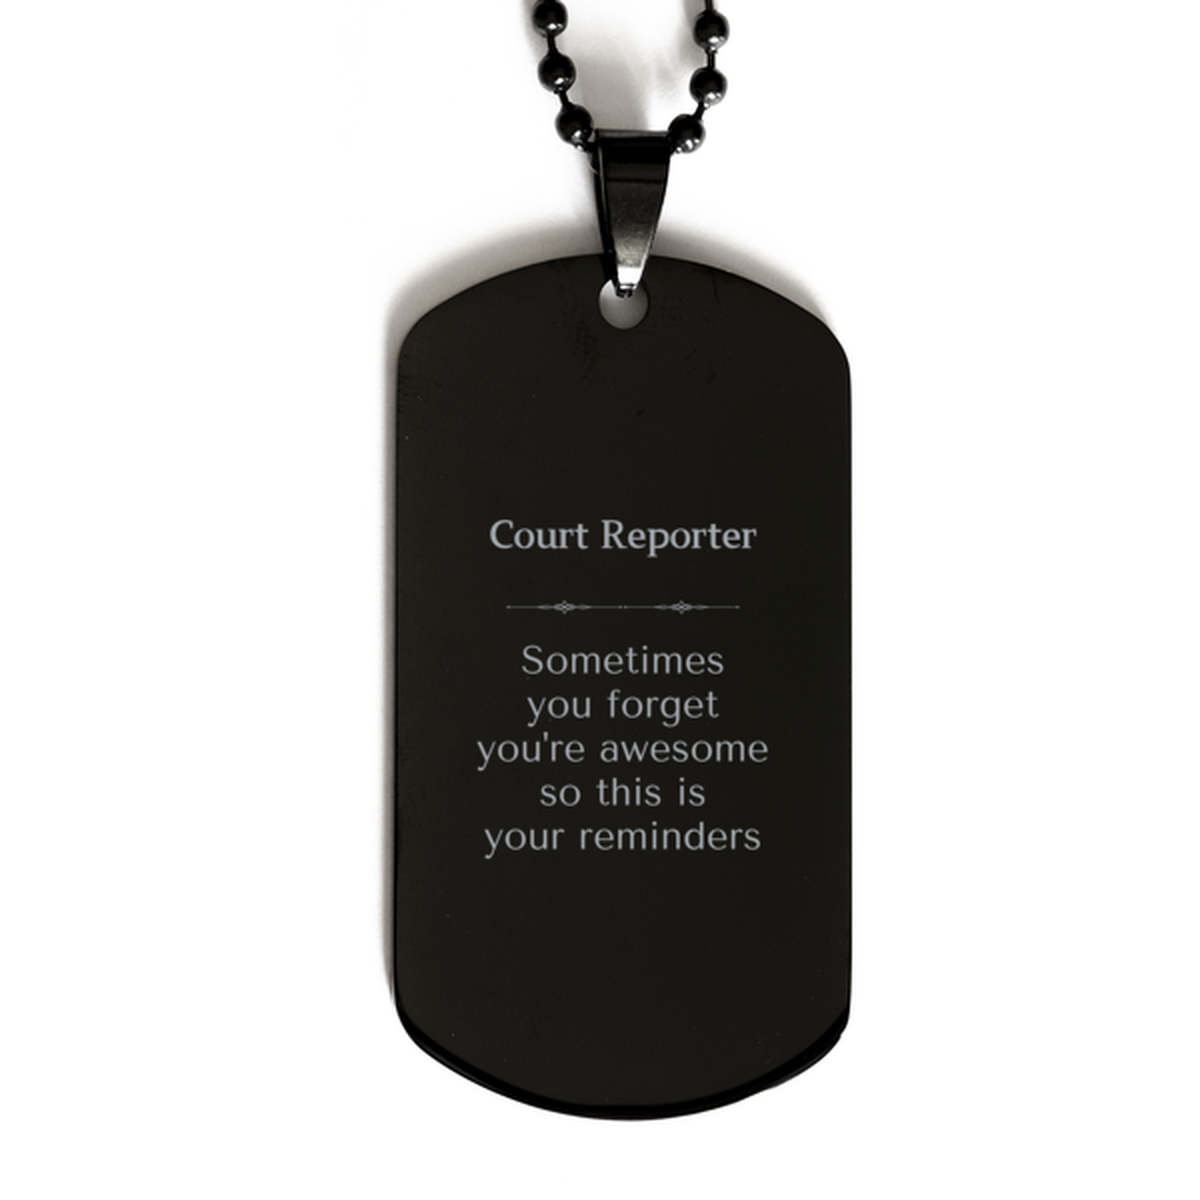 Sentimental Court Reporter Black Dog Tag, Court Reporter Sometimes you forget you're awesome so this is your reminders, Graduation Christmas Birthday Gifts for Court Reporter, Men, Women, Coworkers